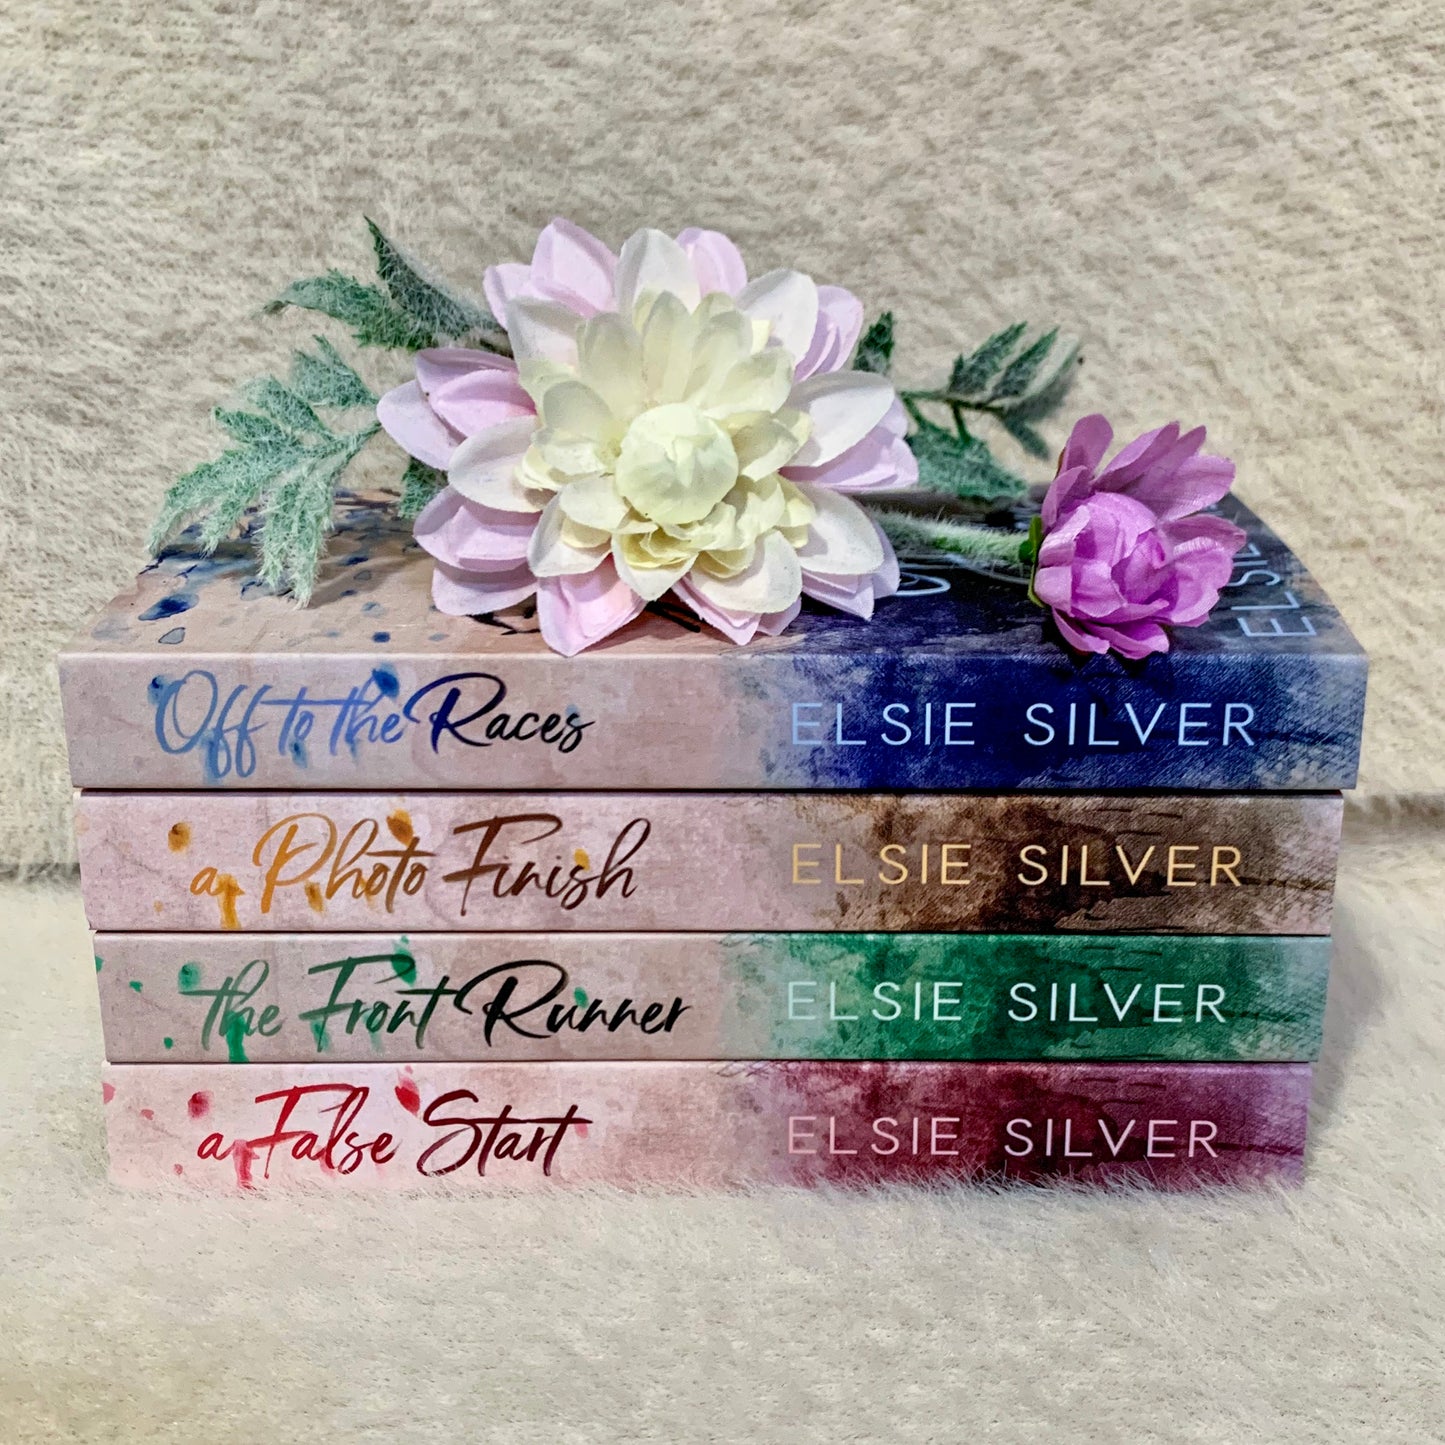 Gold Rush Ranch series by Elsie Silver